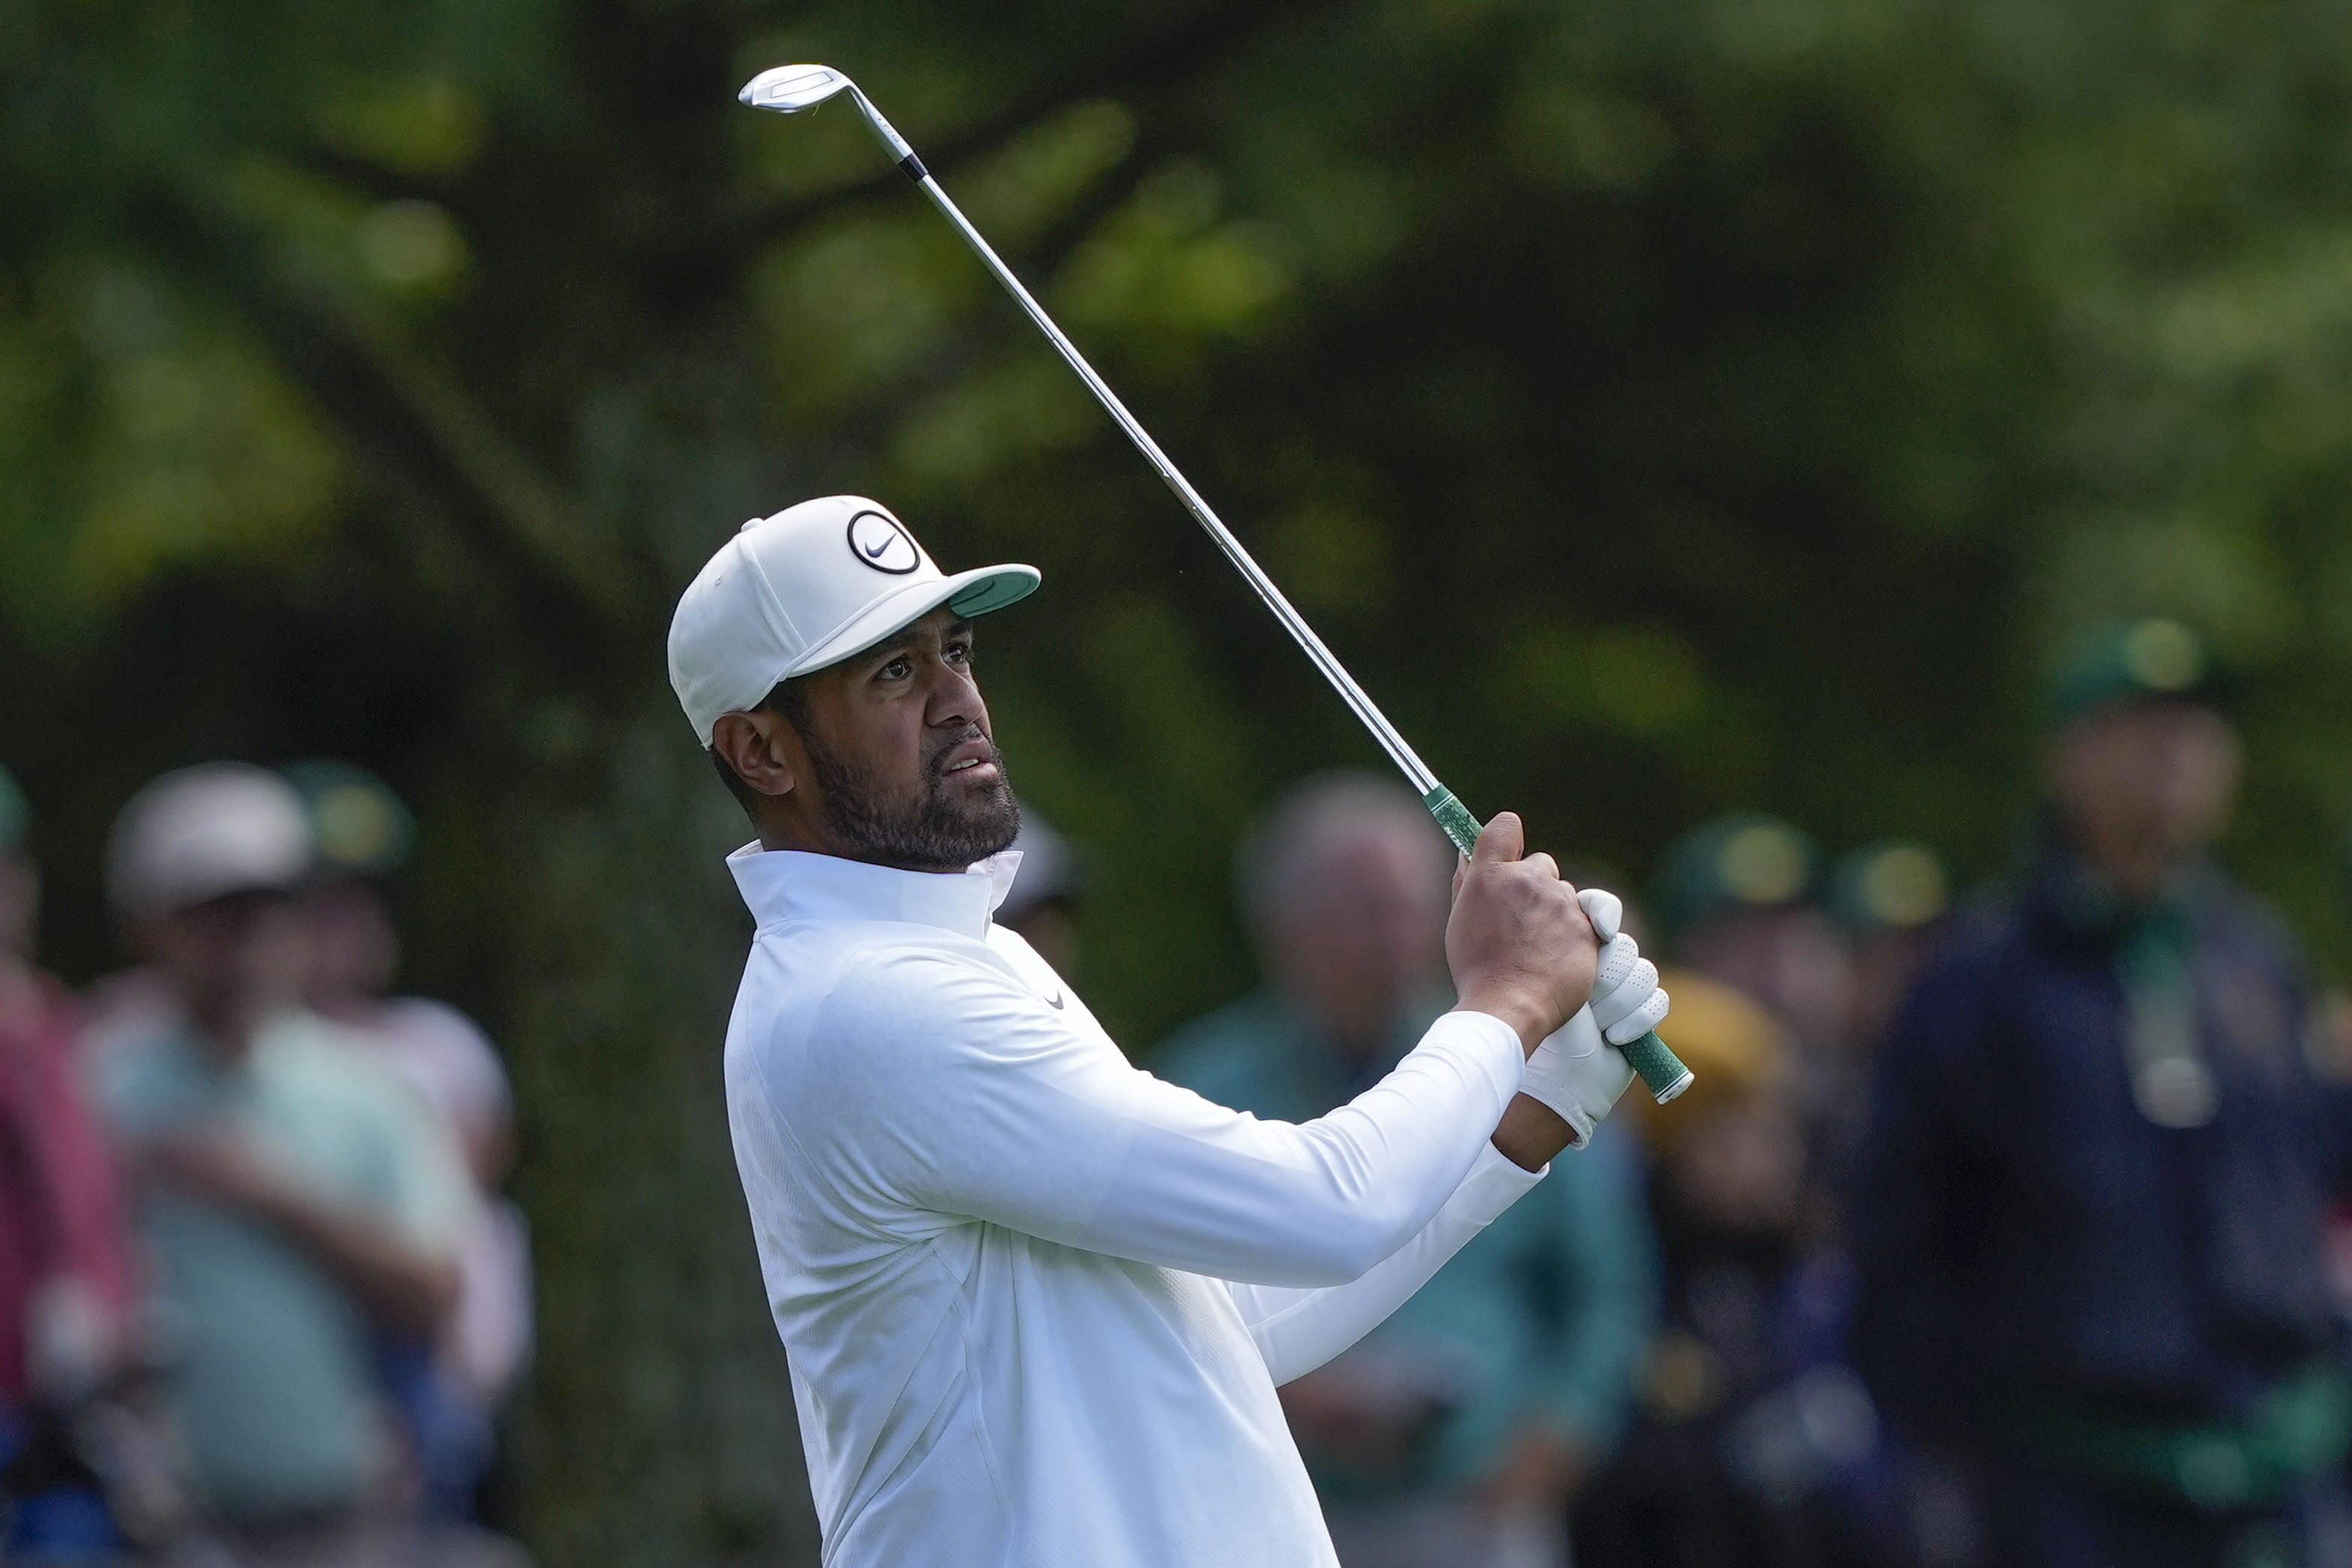 The Masters 2023: When are the tee times for rounds 1 and 2?